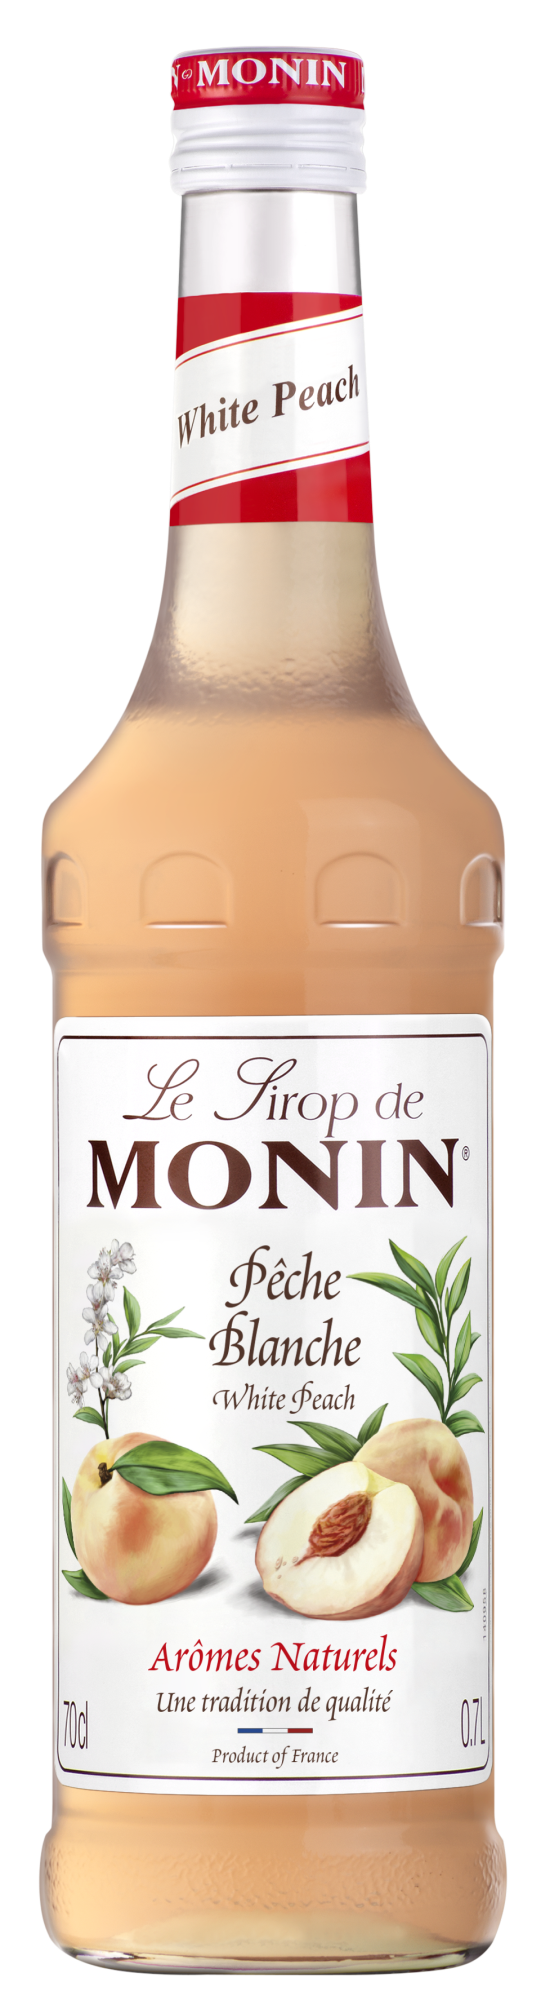 Buy MONIN White Peach Syrup. It captures the intensity of the exquisite white peach flavour to give a unique taste.